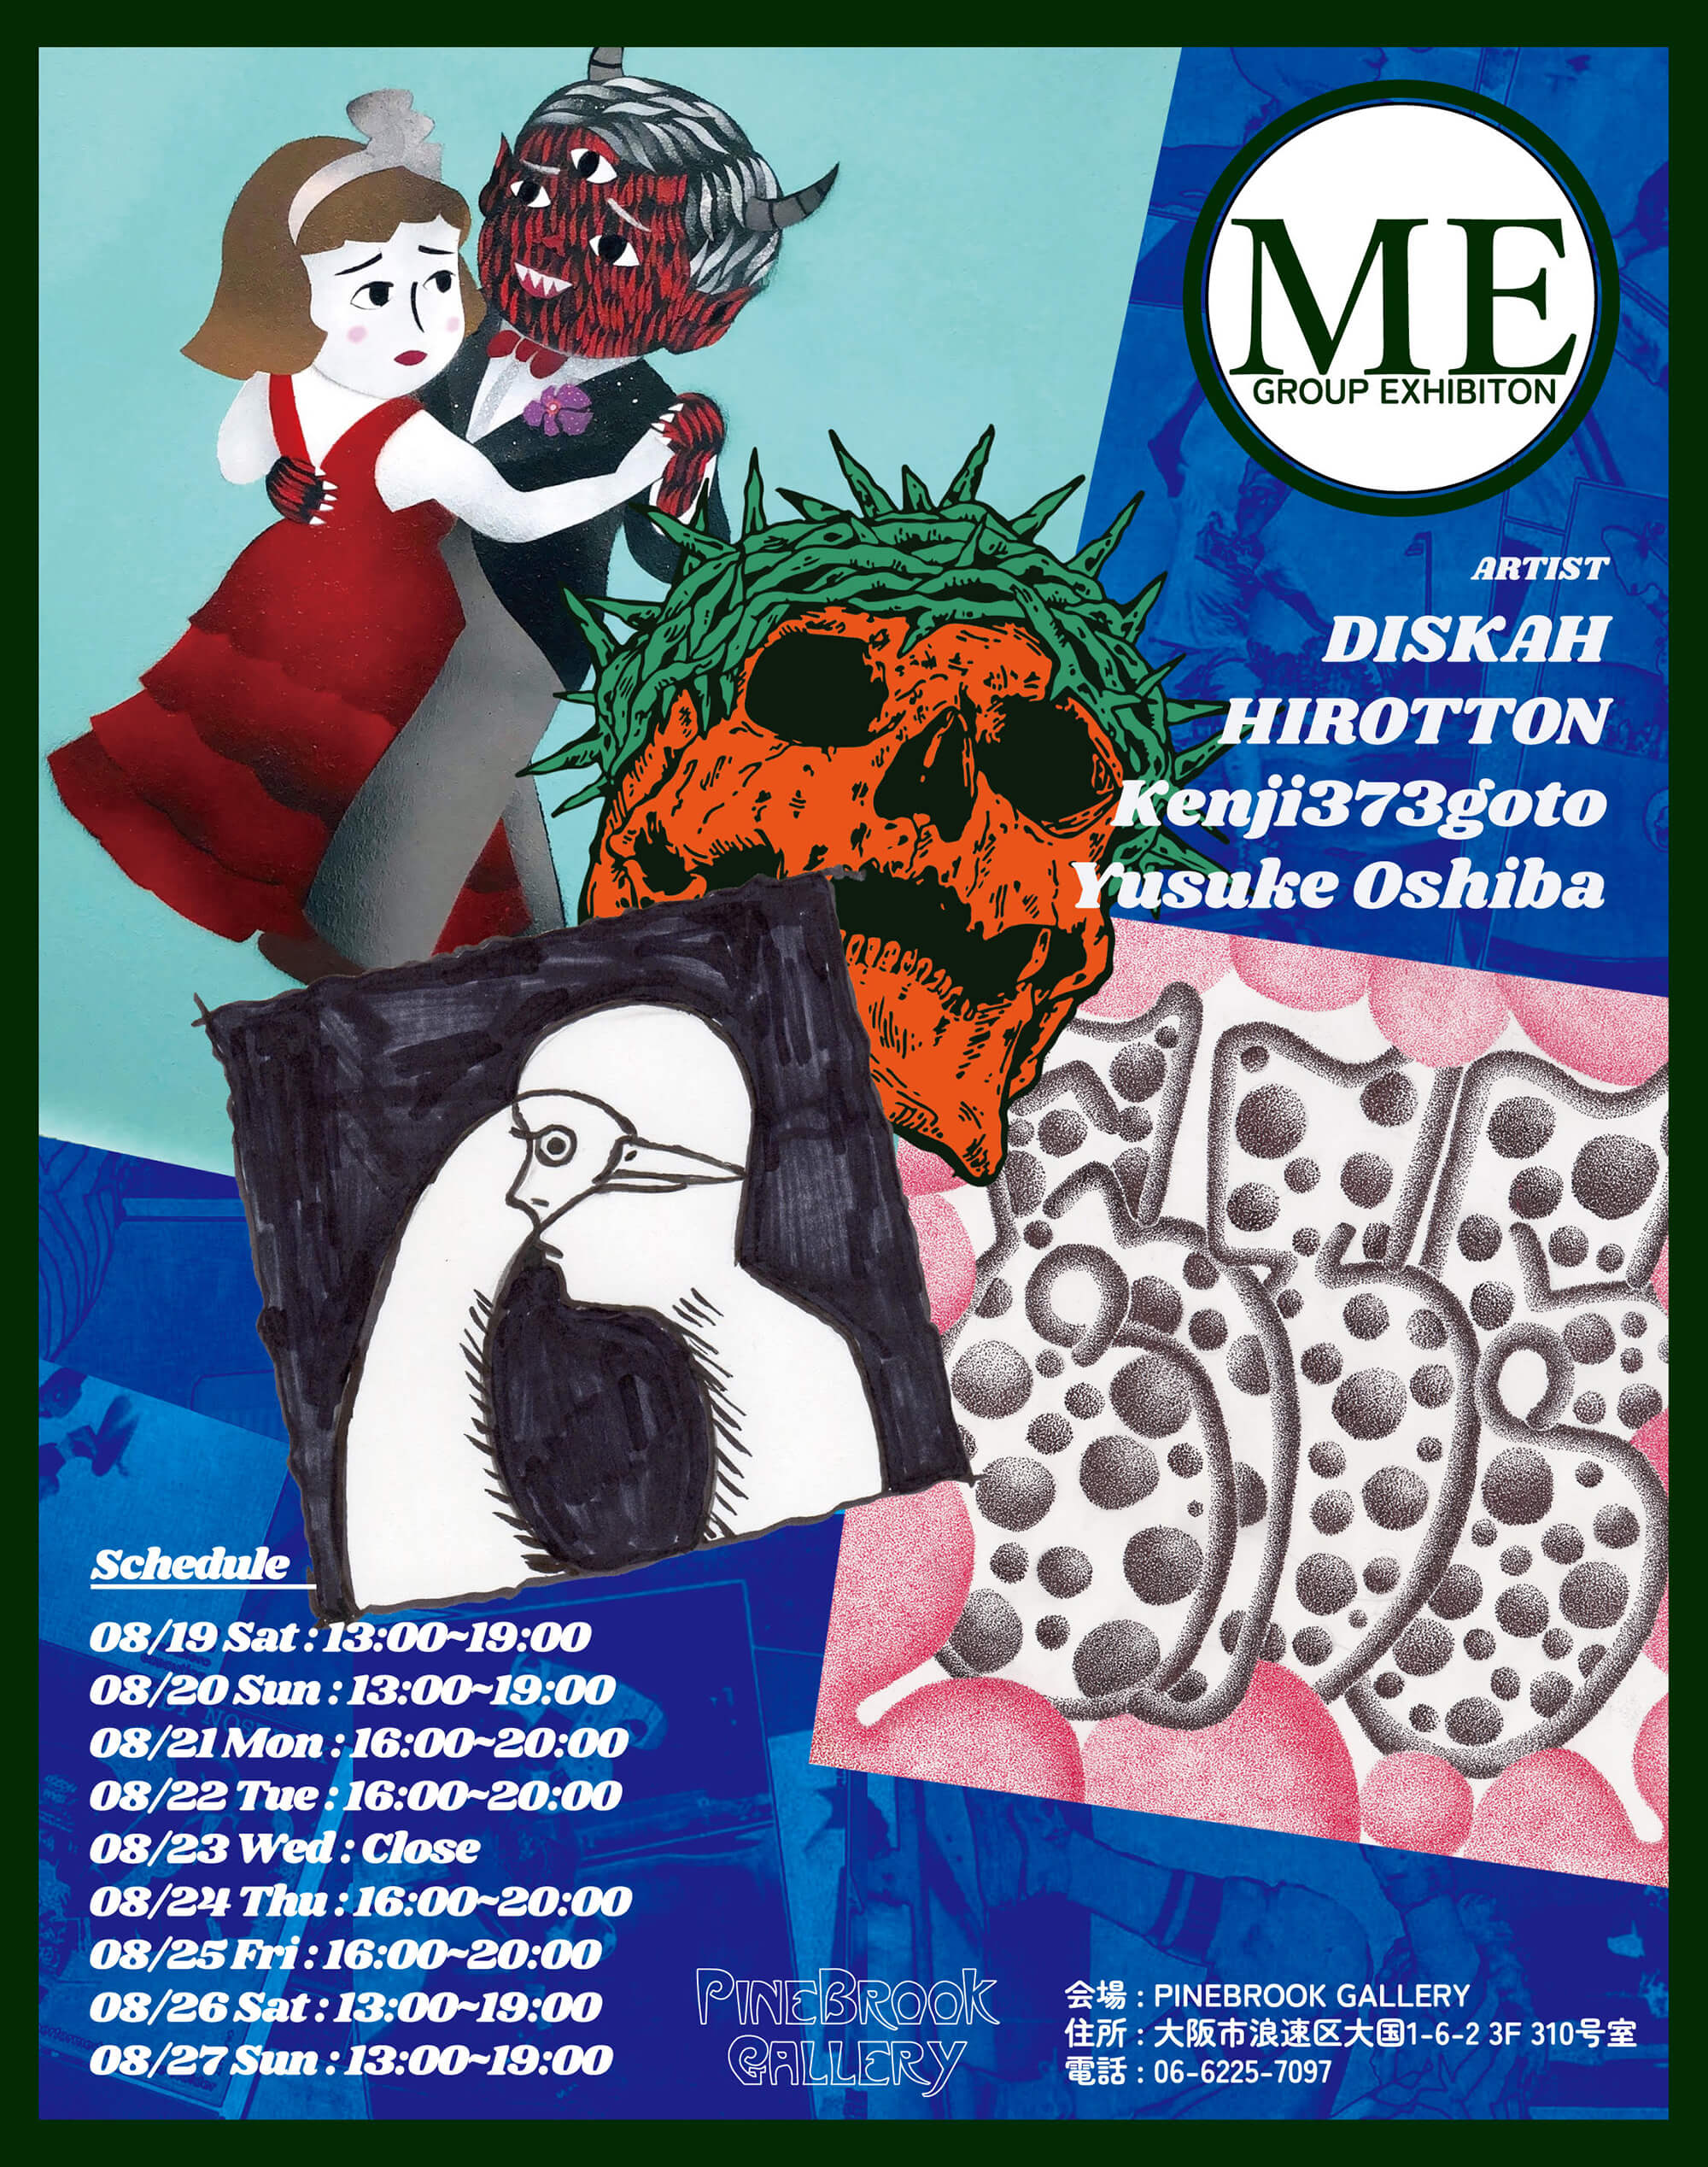 ME group exhibition flyer image